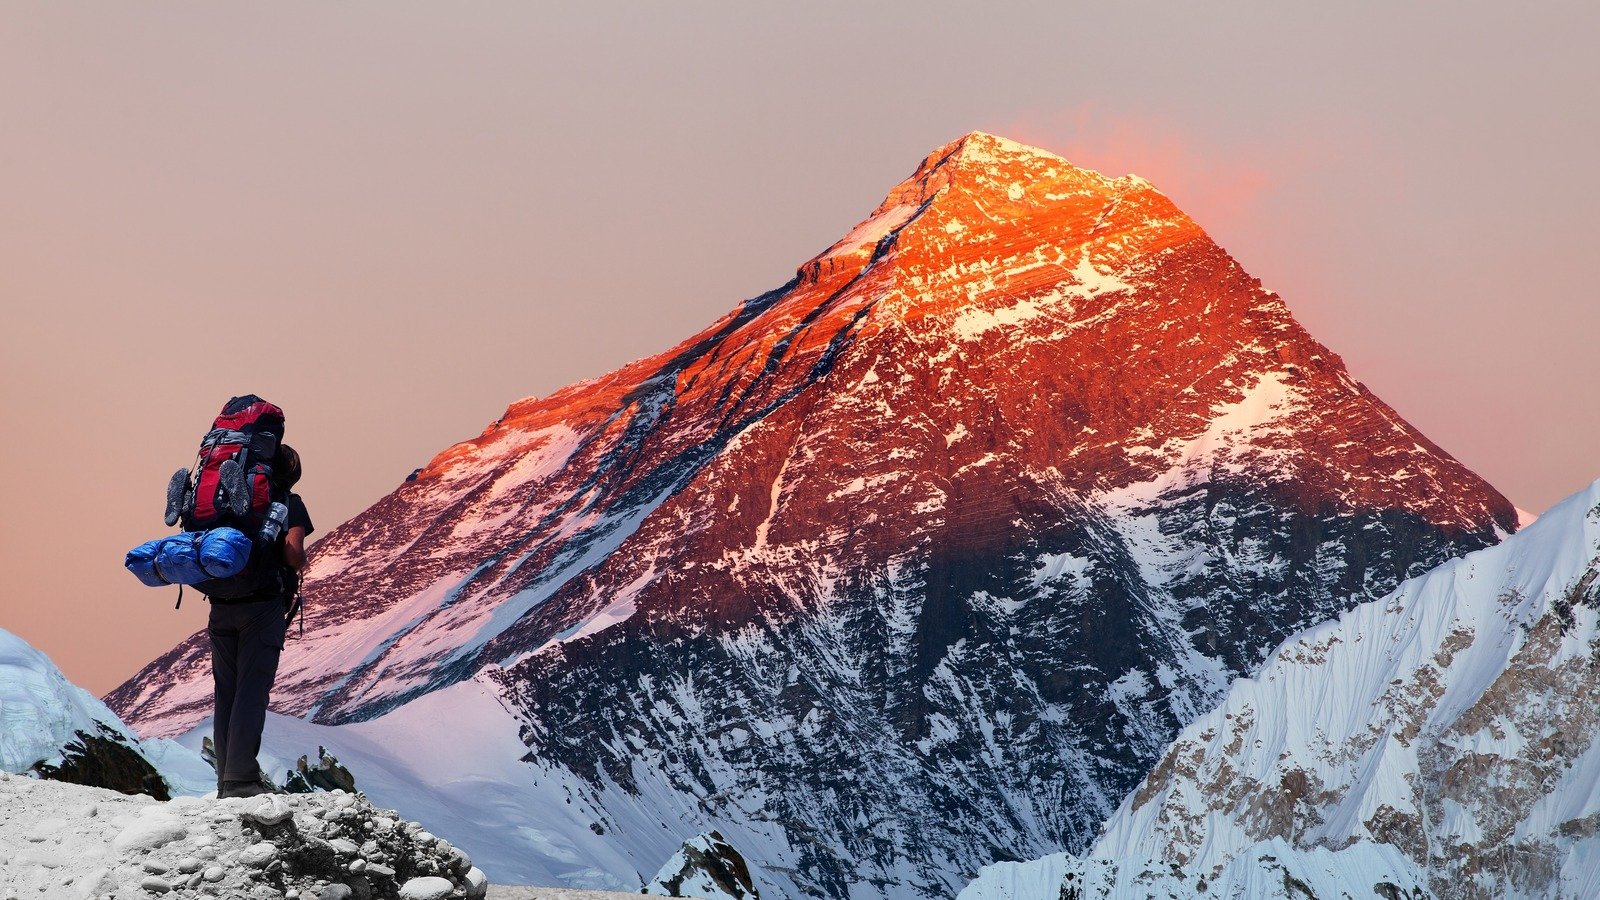 Hike The Tallest Mountain In The World At This Stunning National Park